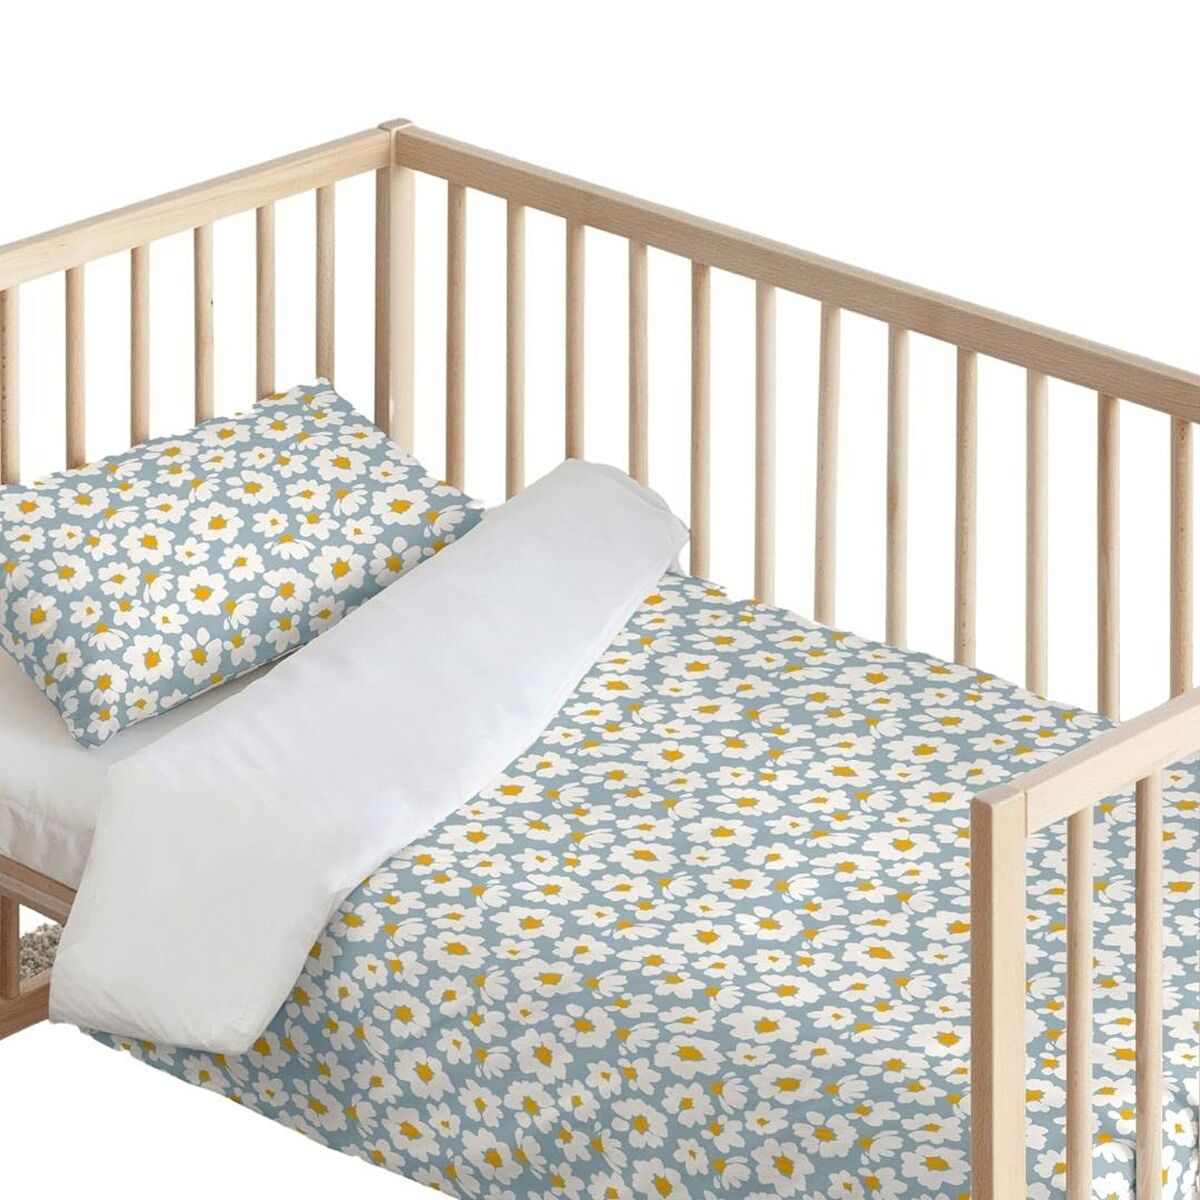 Cot Quilt Cover Kids&Cotton Xalo Small 100 x 120 cm